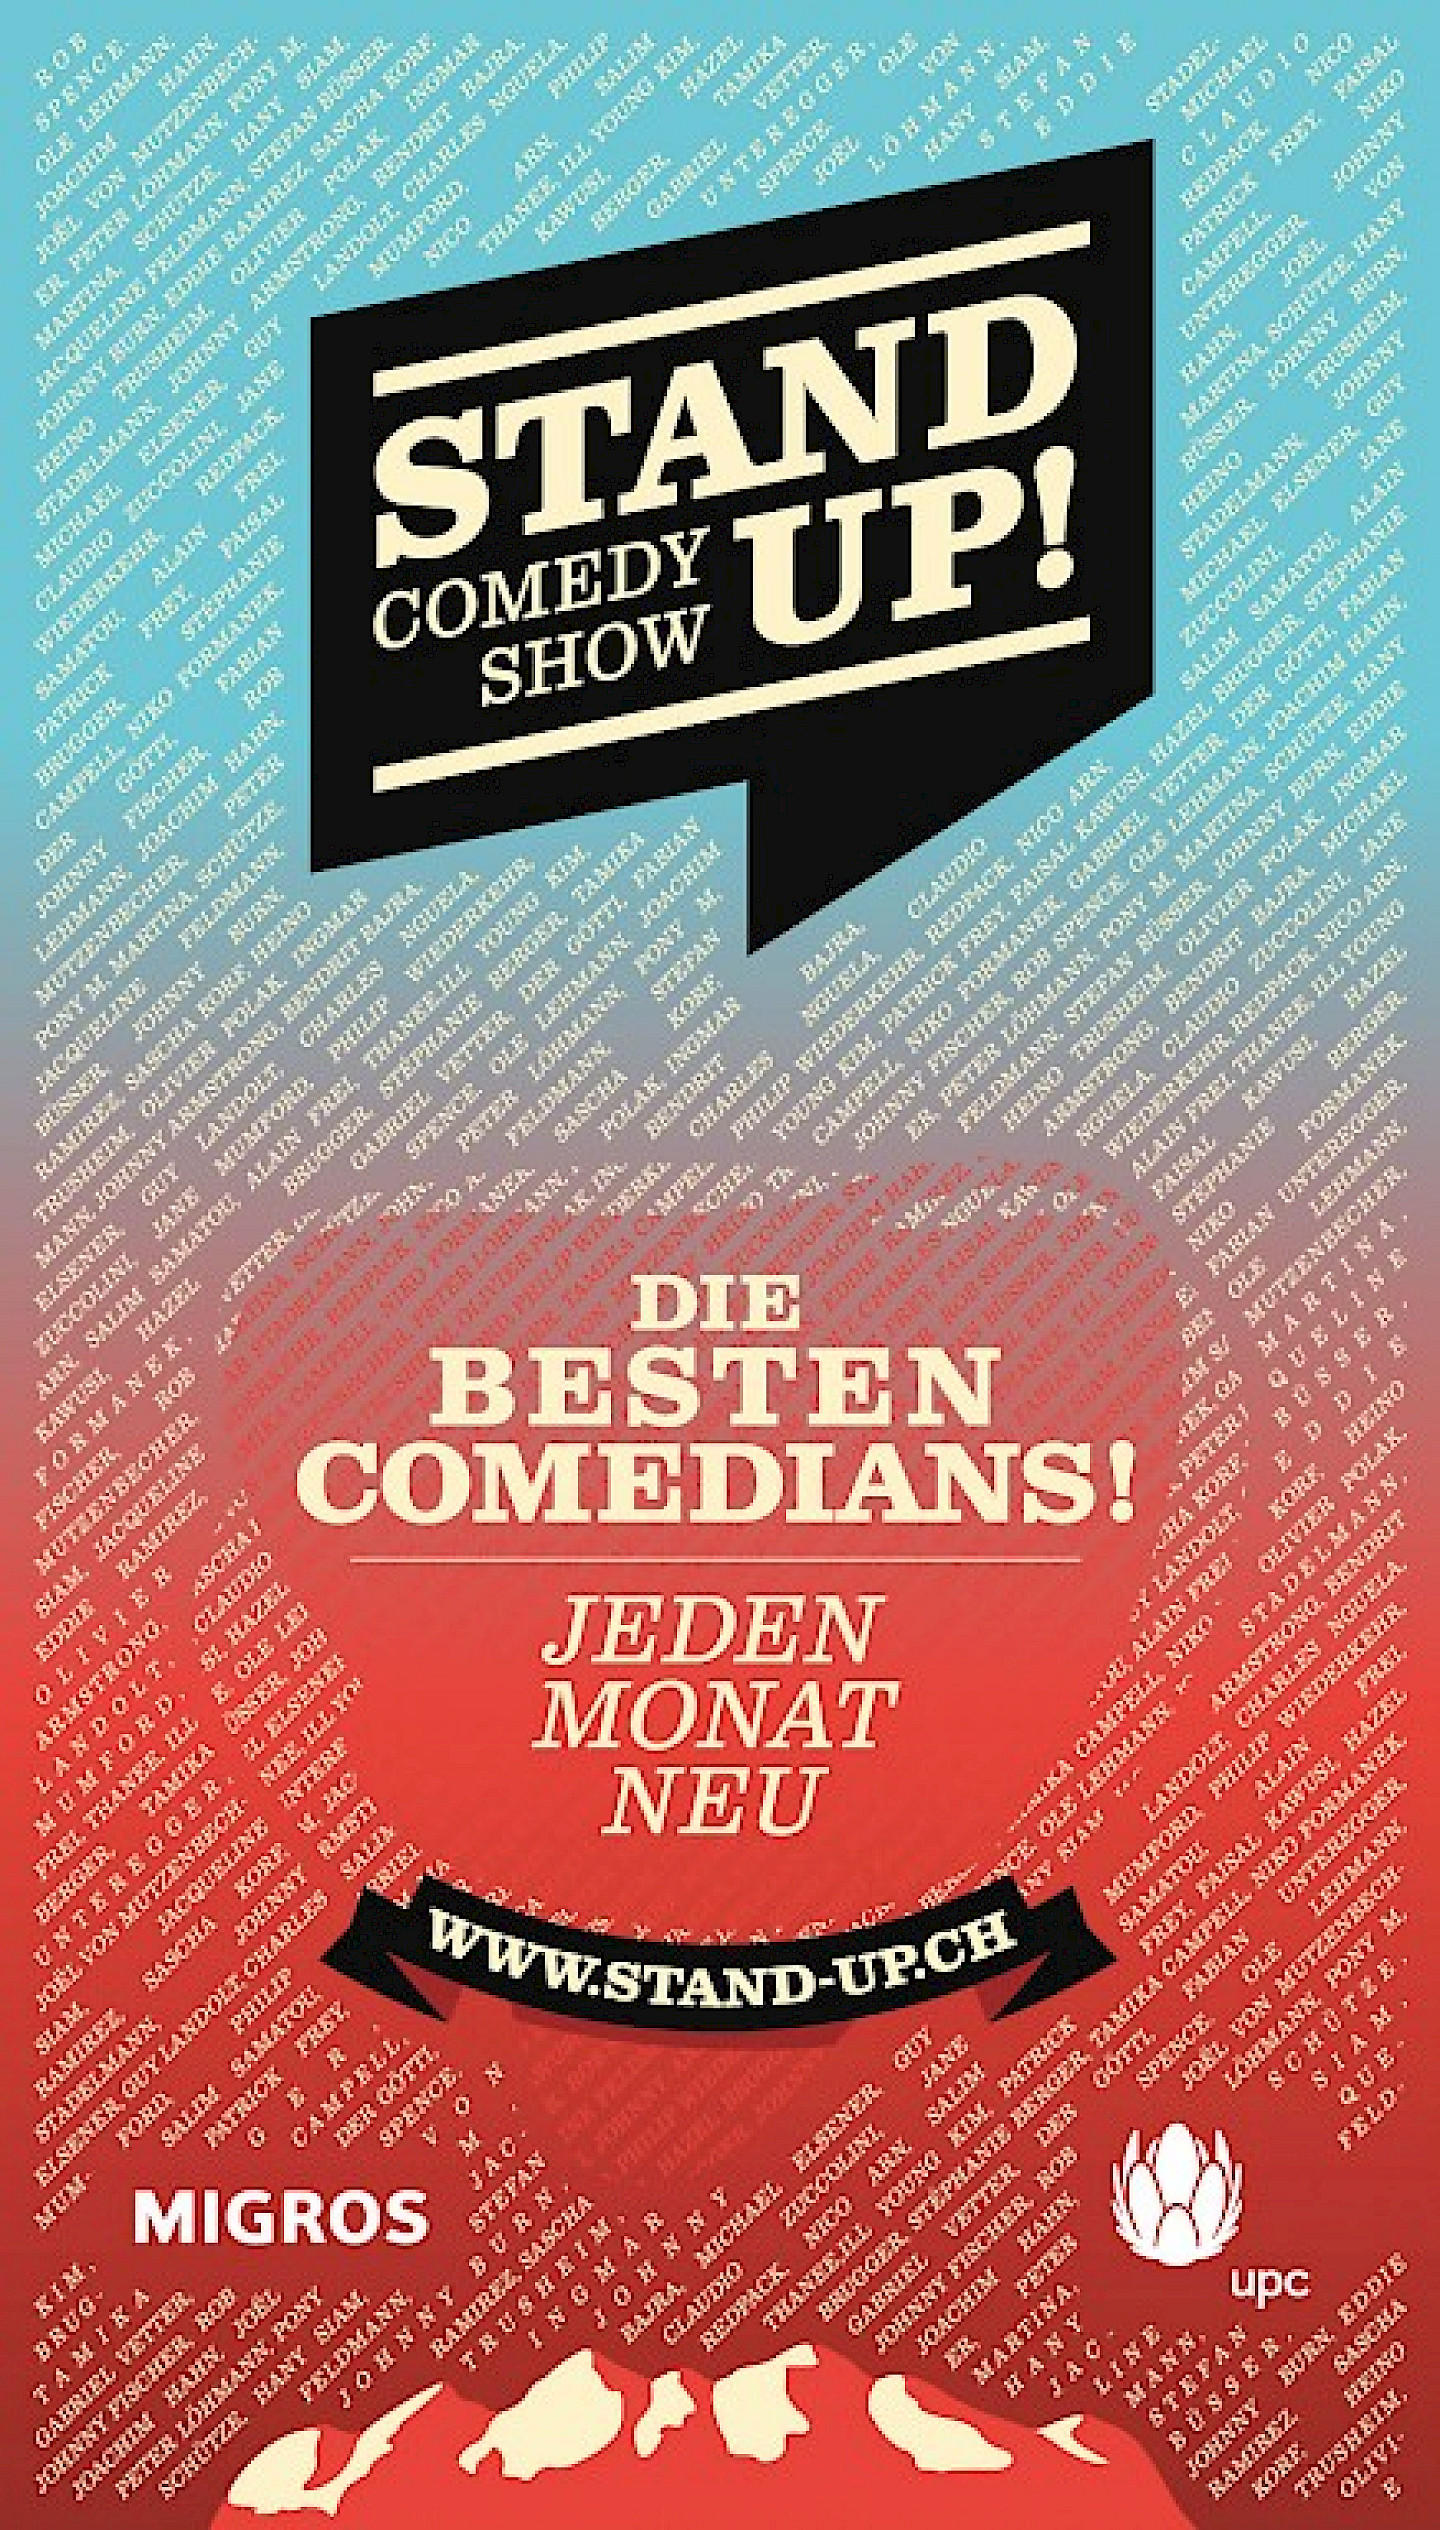 STAND UP! Comedy Double Show Lehmann & Korf